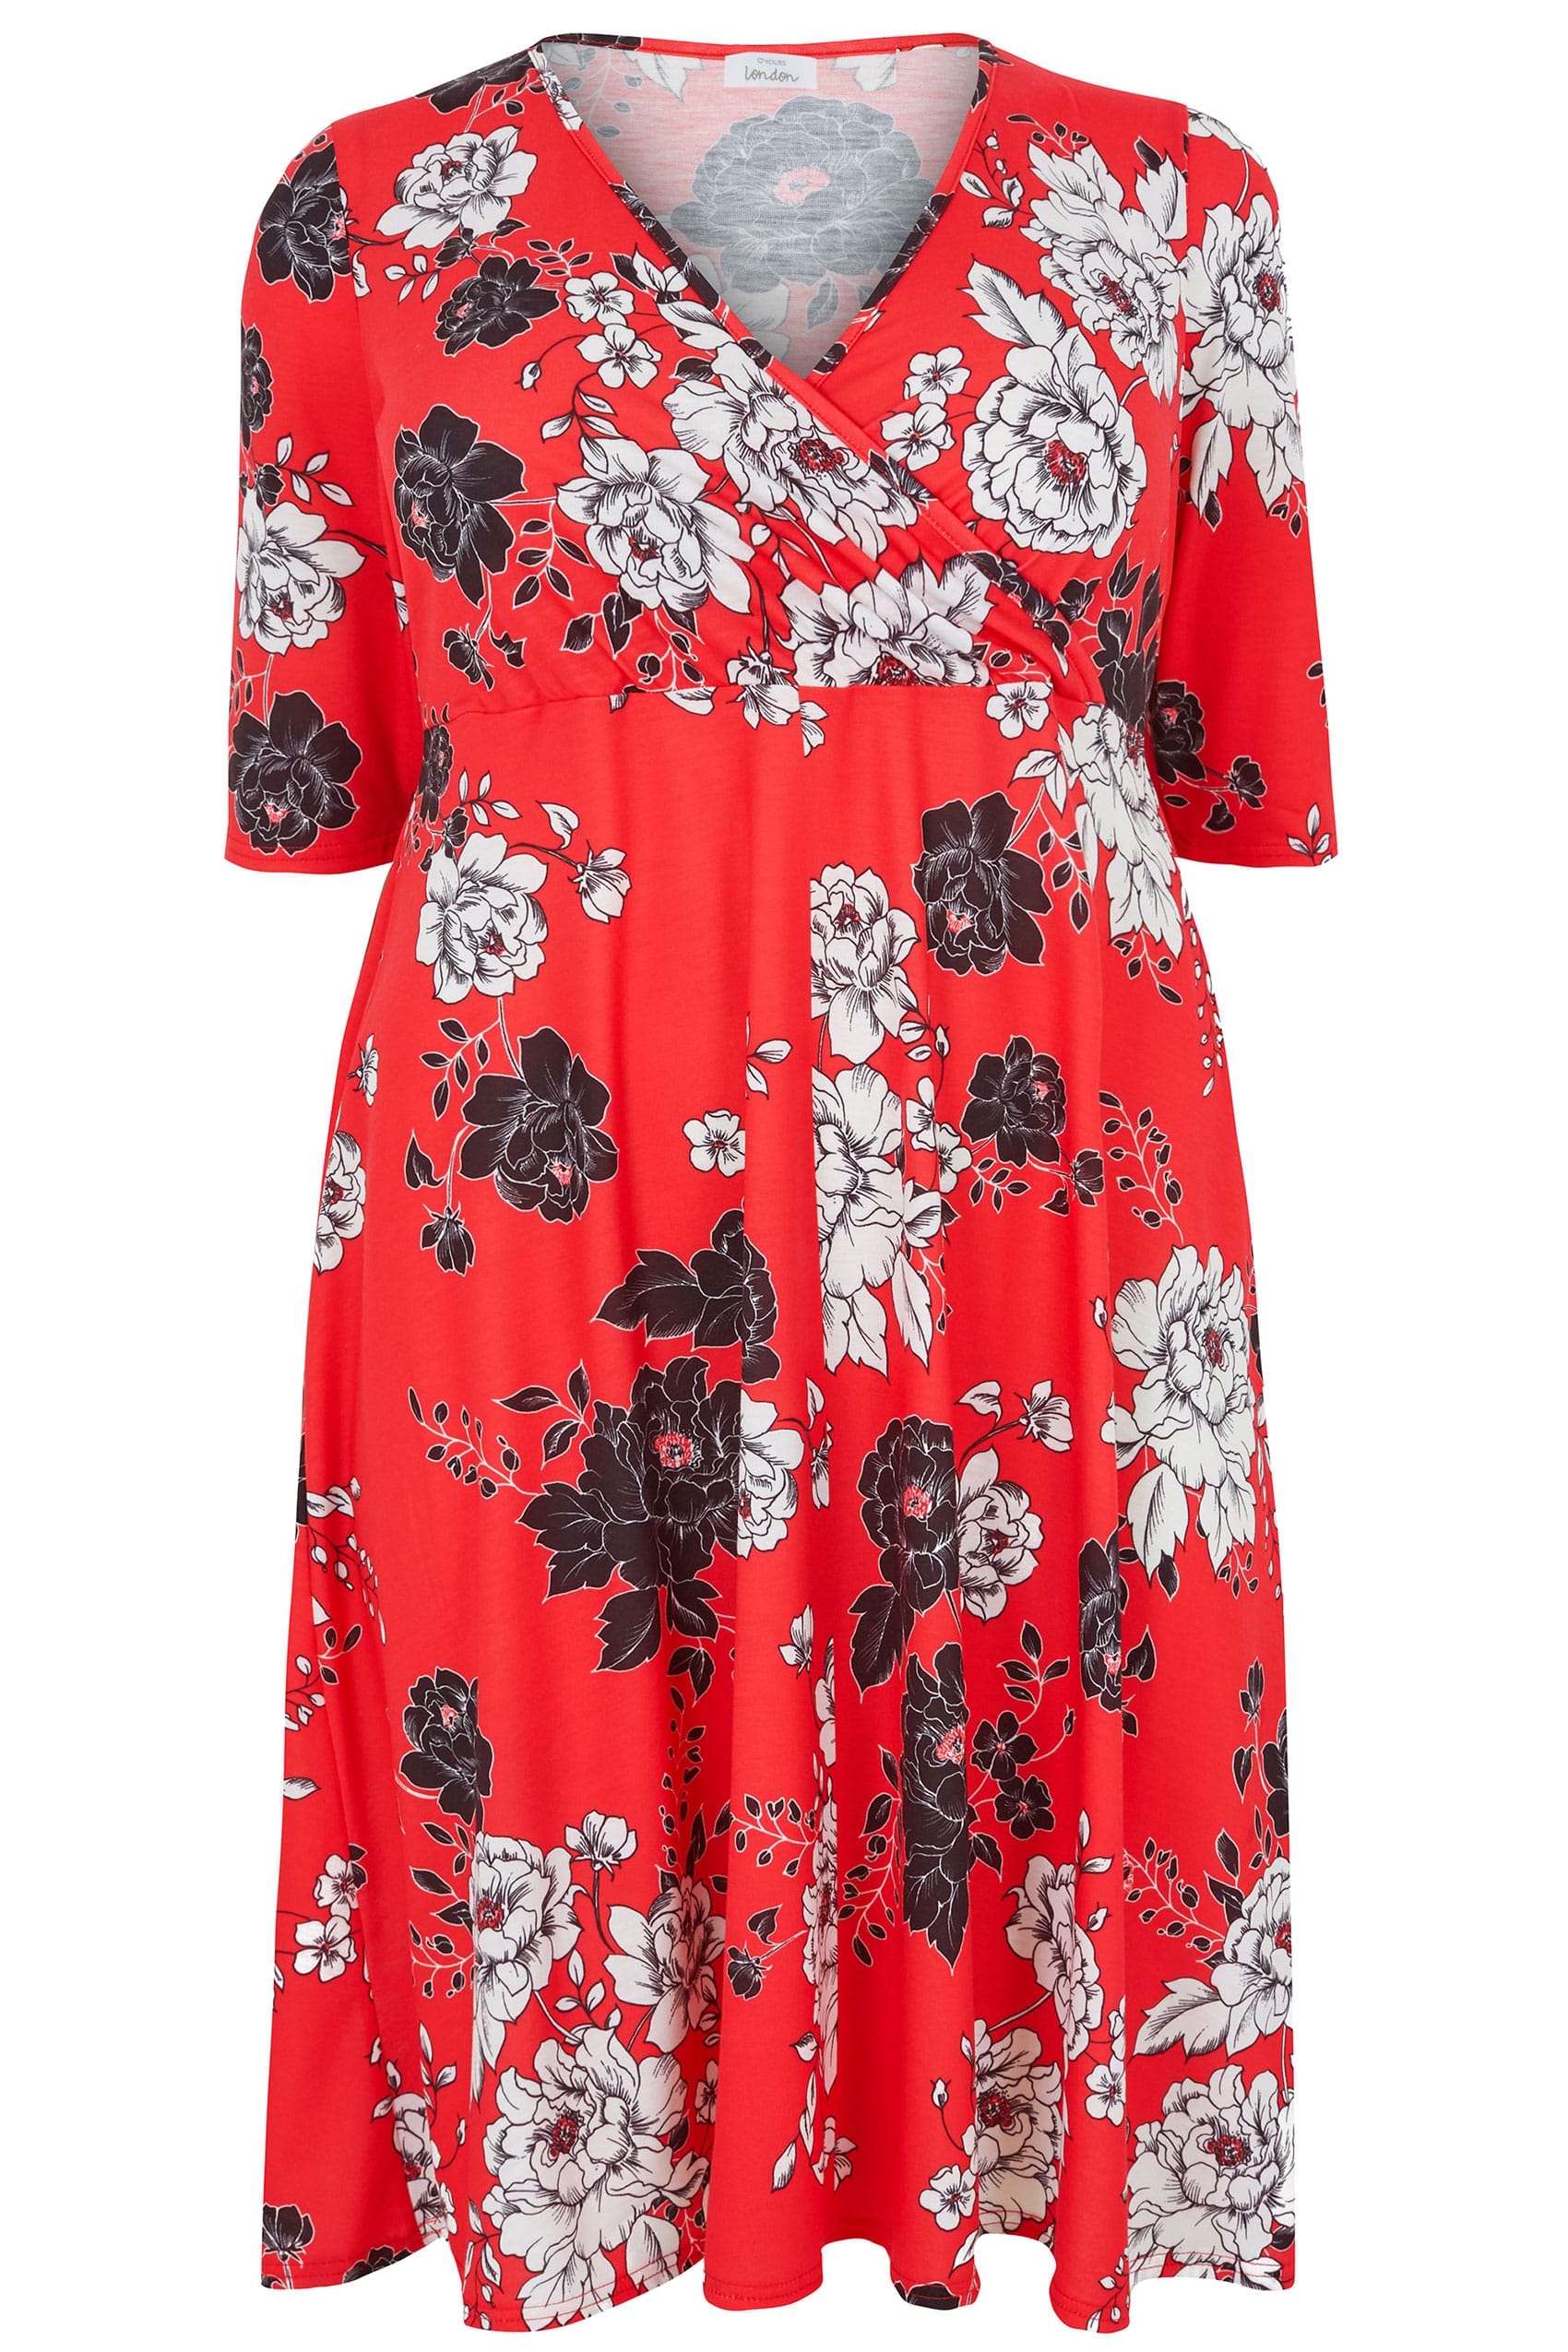 YOURS LONDON Red Floral Wrap Dress, plus size 16 to 36